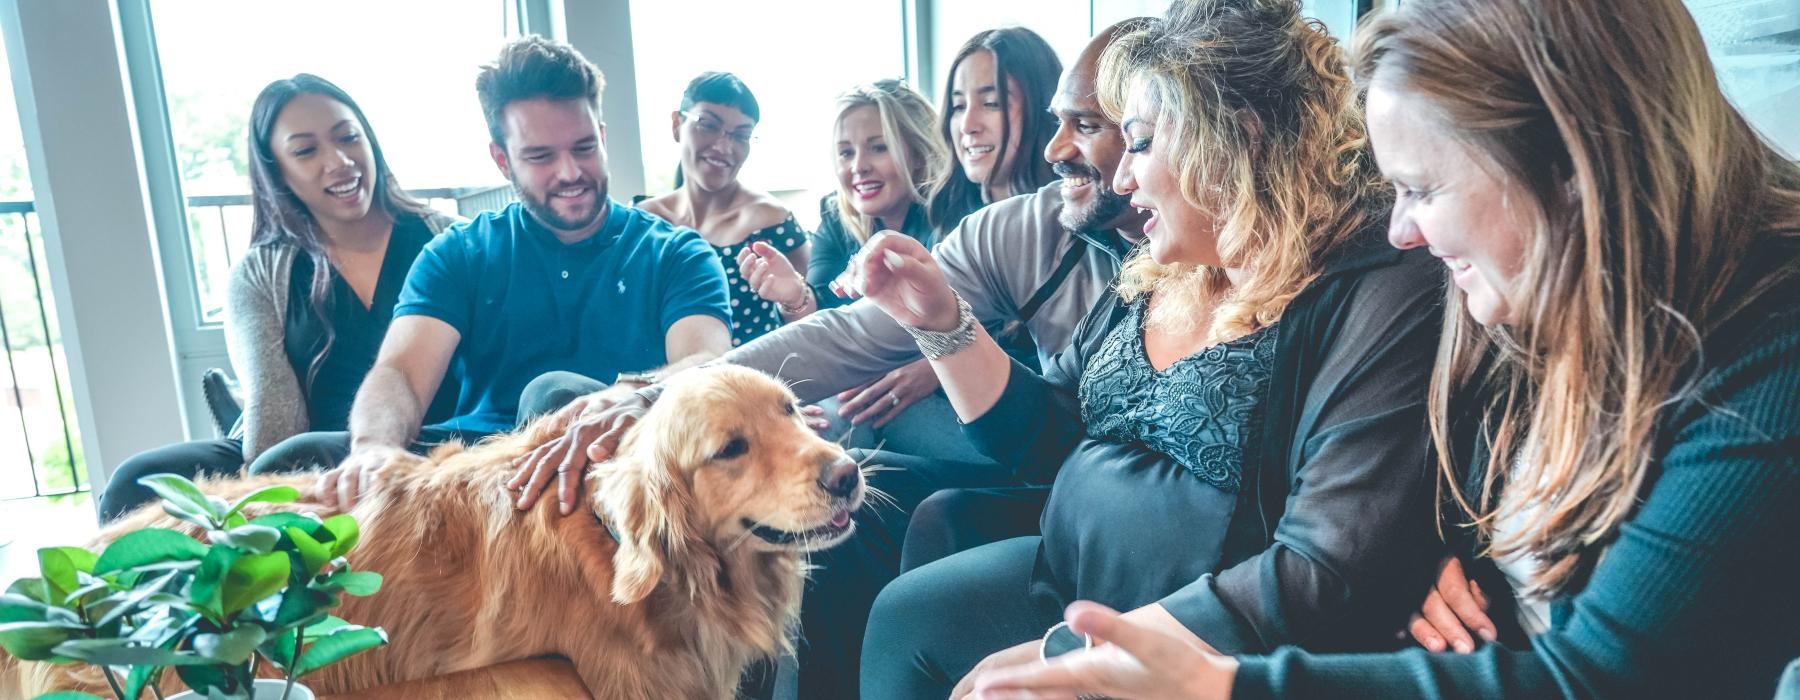 a group of people sitting in a room with a dog